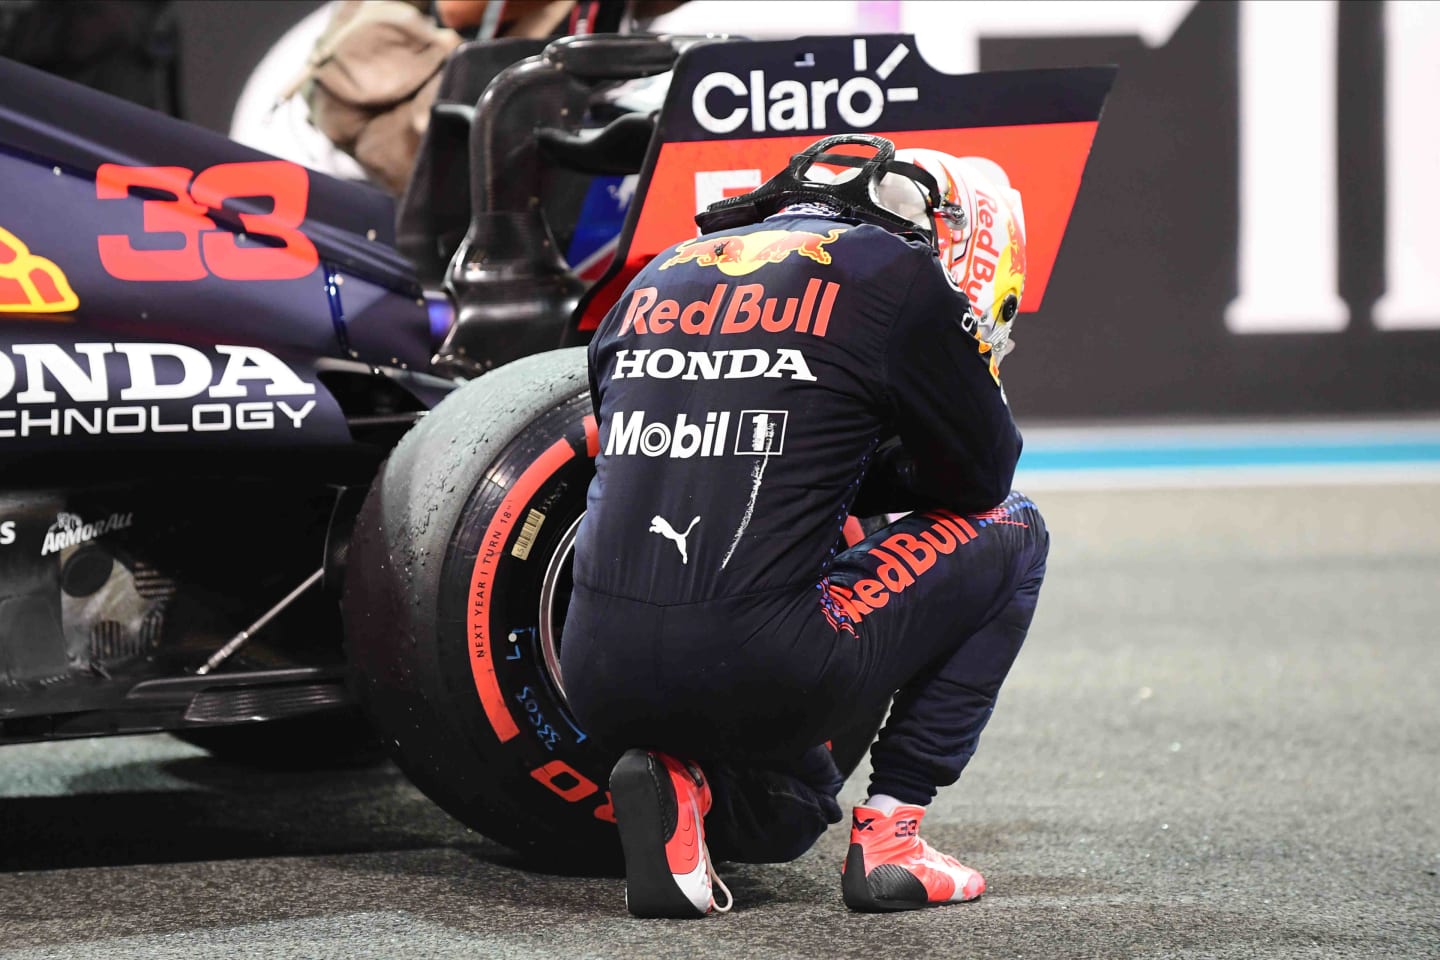 Verstappen took a moment for himself after winning the 2021 world title in his Red Bull-Honda